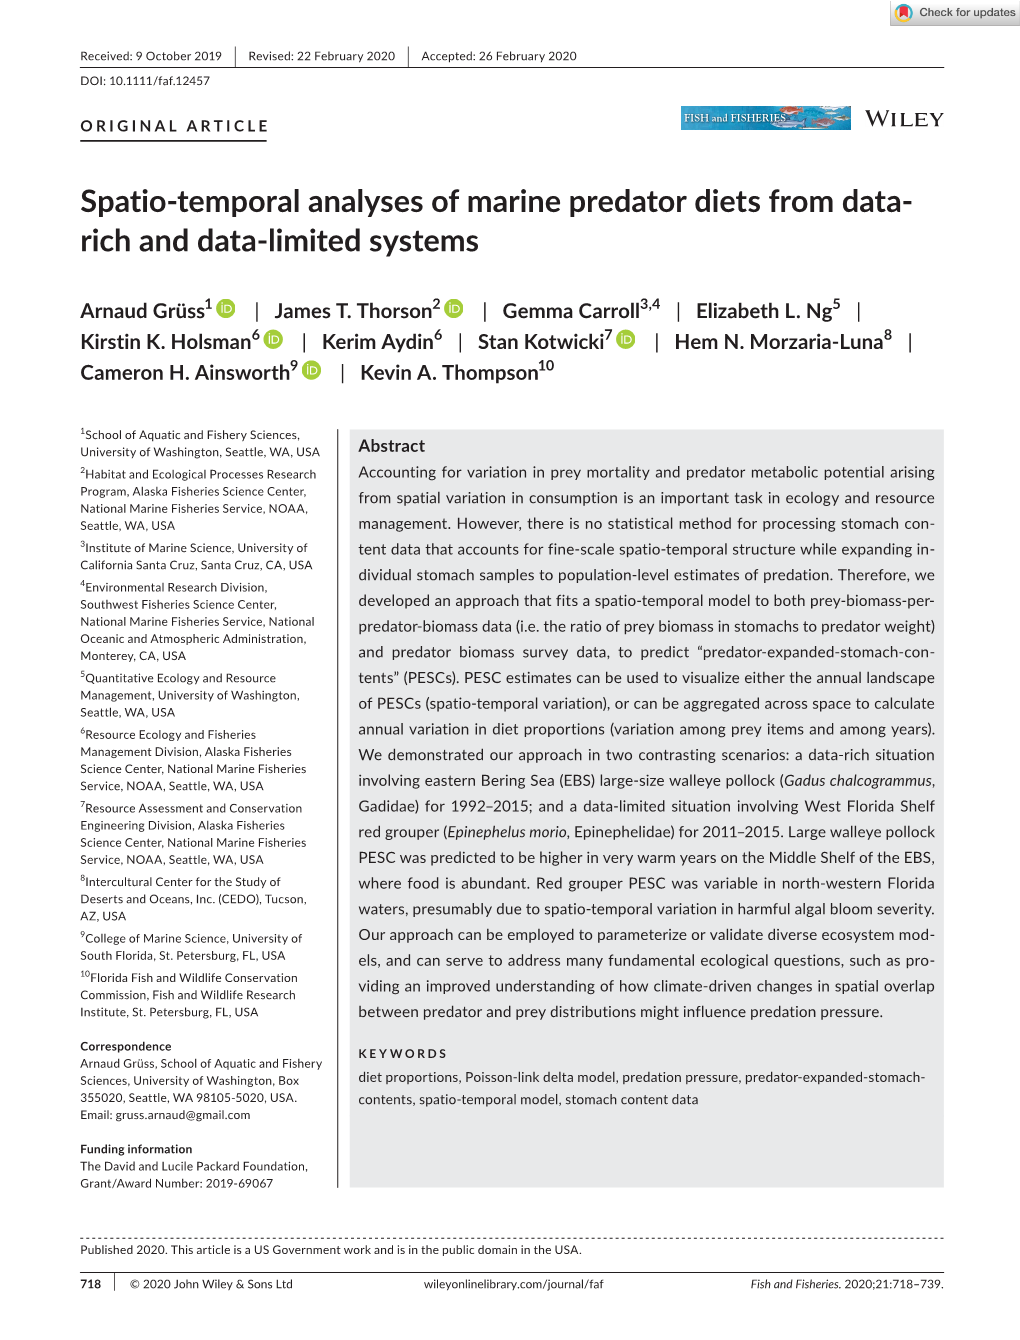 Spatio‐Temporal Analyses of Marine Predator Diets from Data‐Rich And